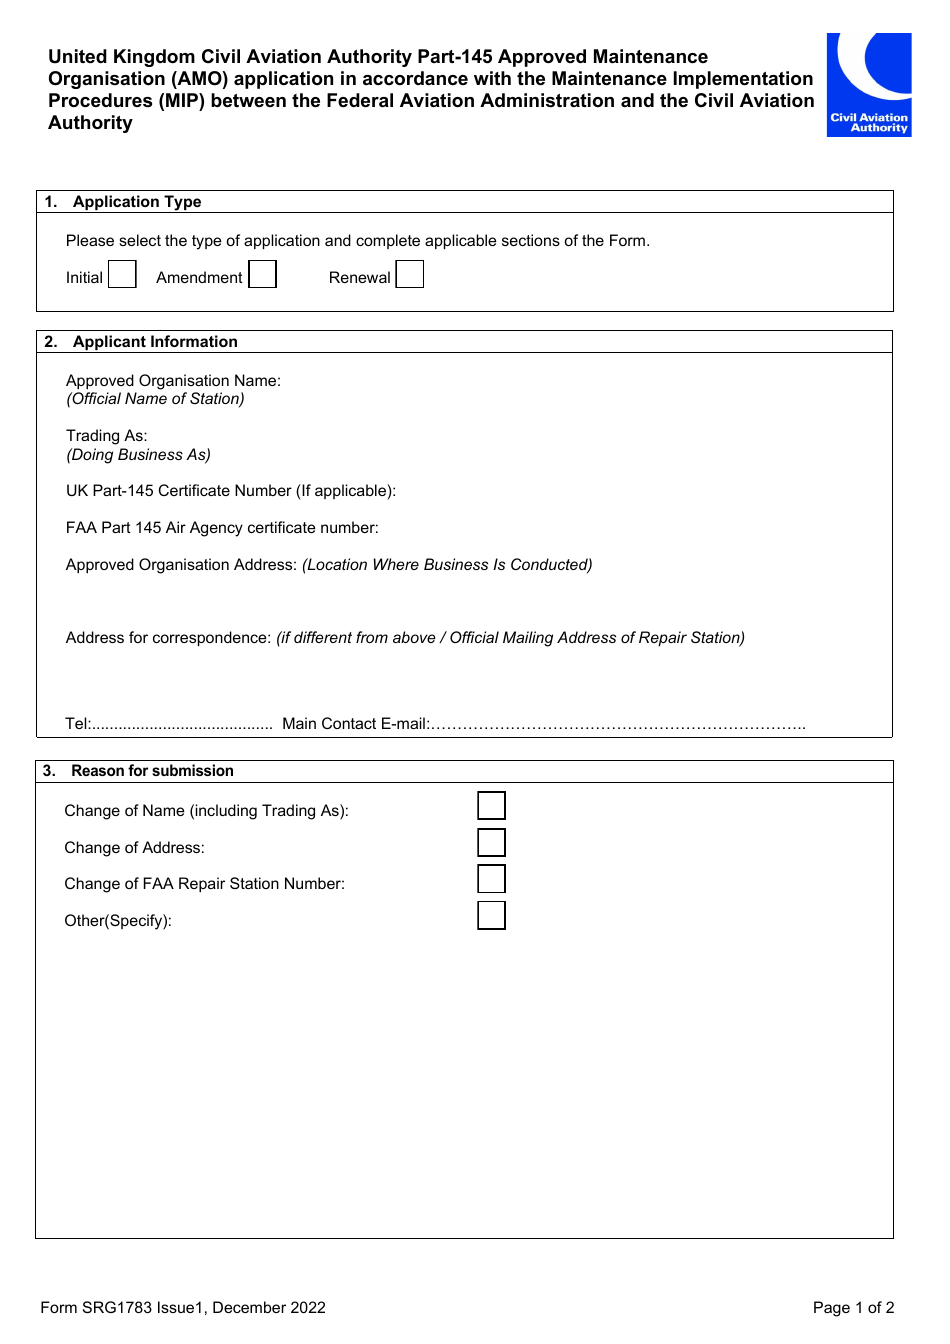 Form SRG1783 United Kingdom Civil Aviation Authority Part-145 Approved Maintenance Organisation (Amo) Application in Accordance With the Maintenance Implementation Procedures (Mip) Between the Federal Aviation Administration and the Civil Aviation Authority - United Kingdom, Page 1